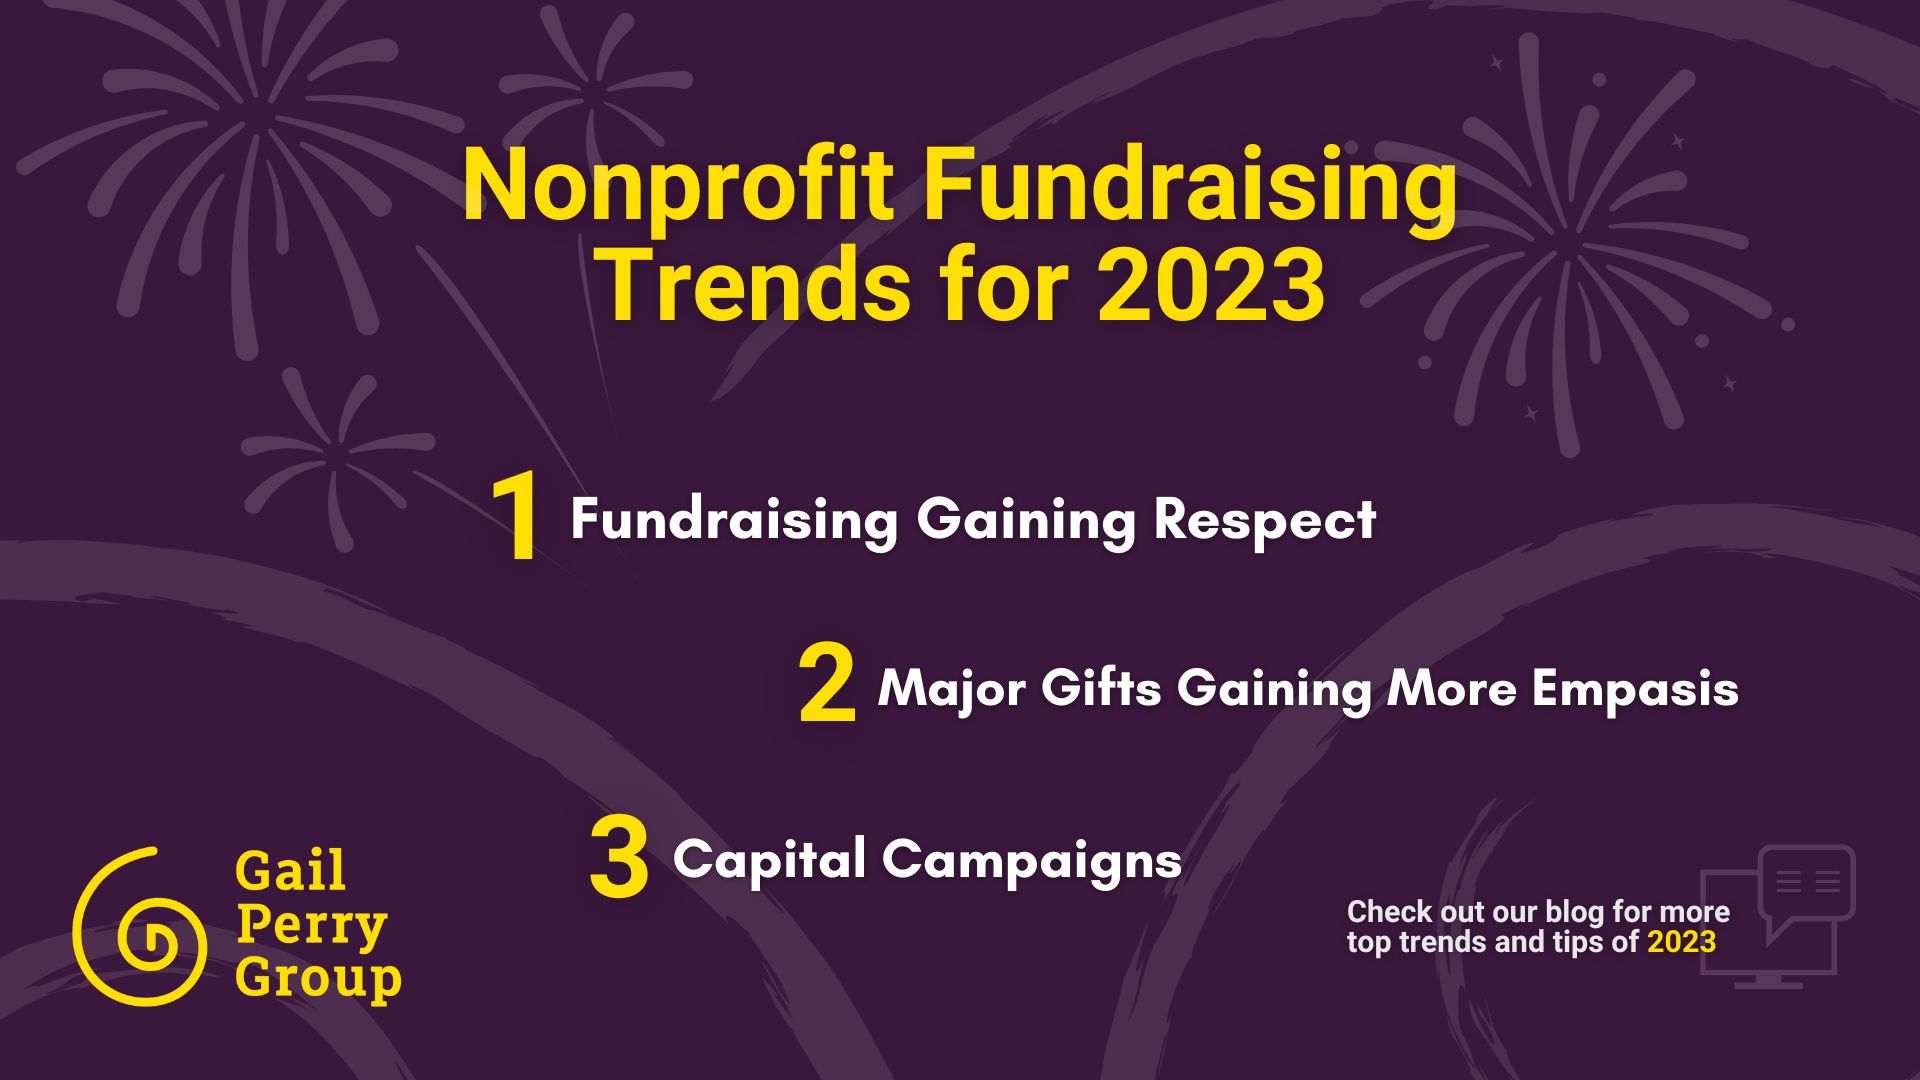 Nonprofit Fundraising Trends for 2023